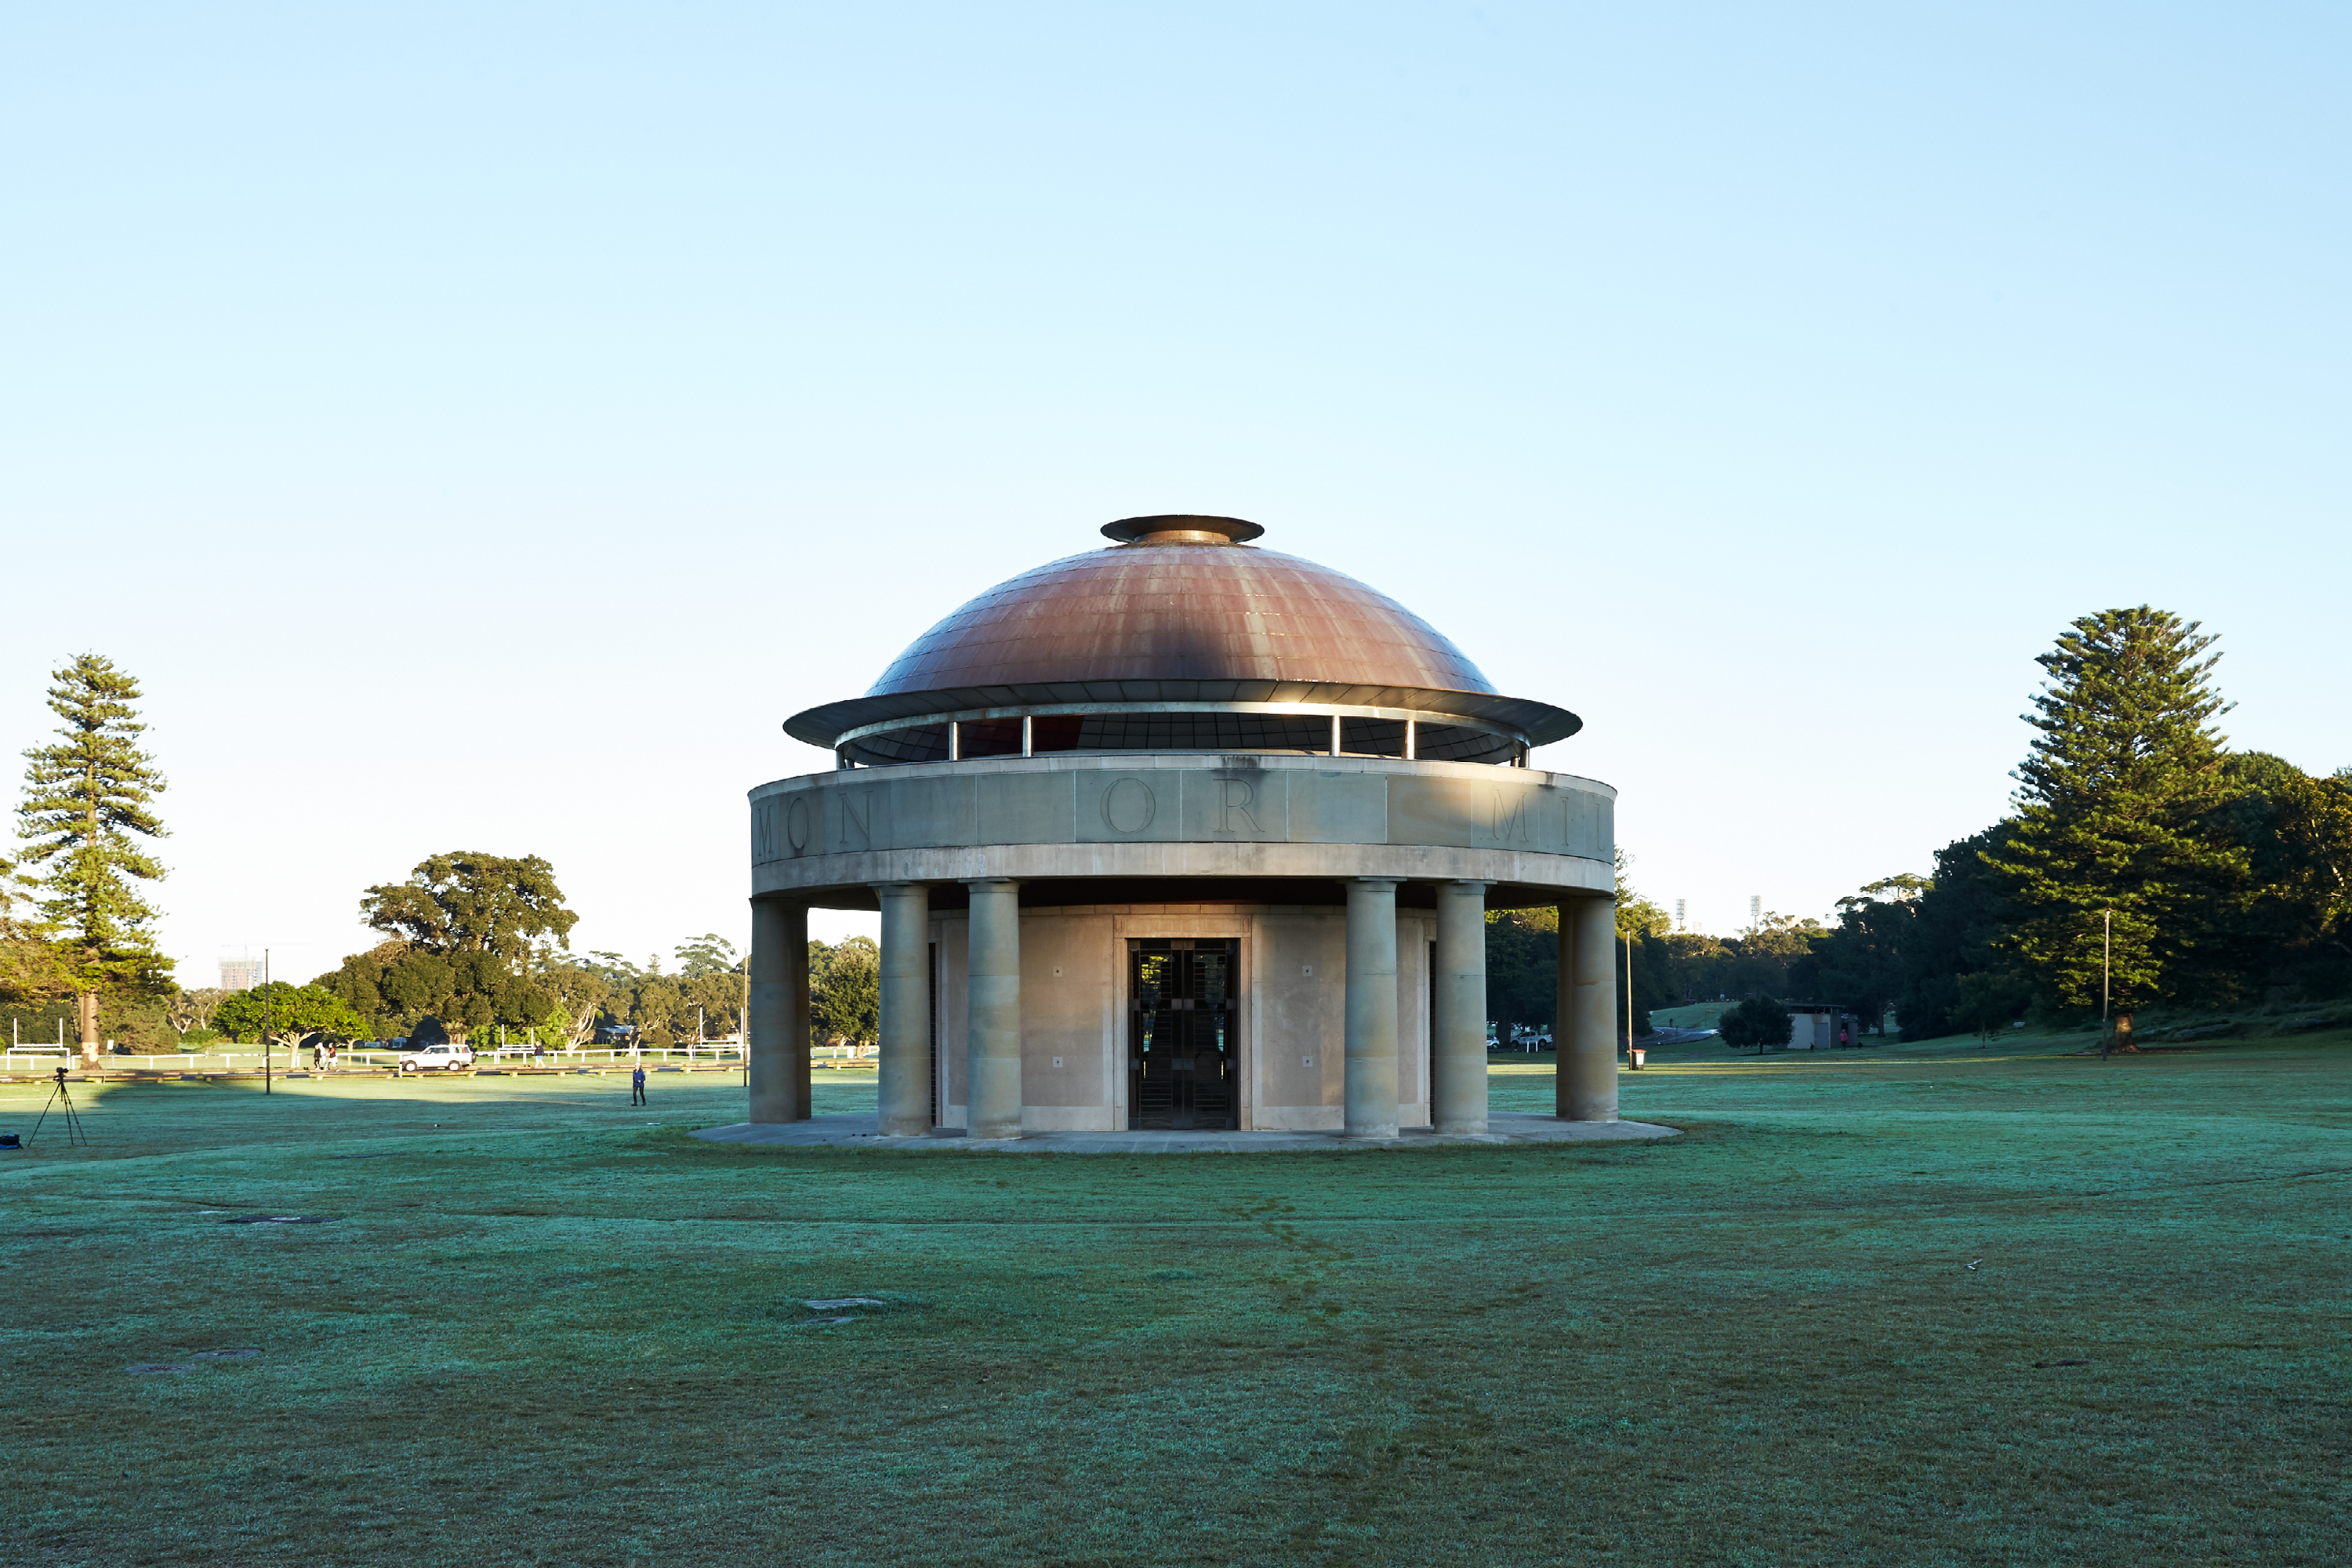 Photograph of the award-wining Federation Pavilion in Centennial Park designed by Tzannes